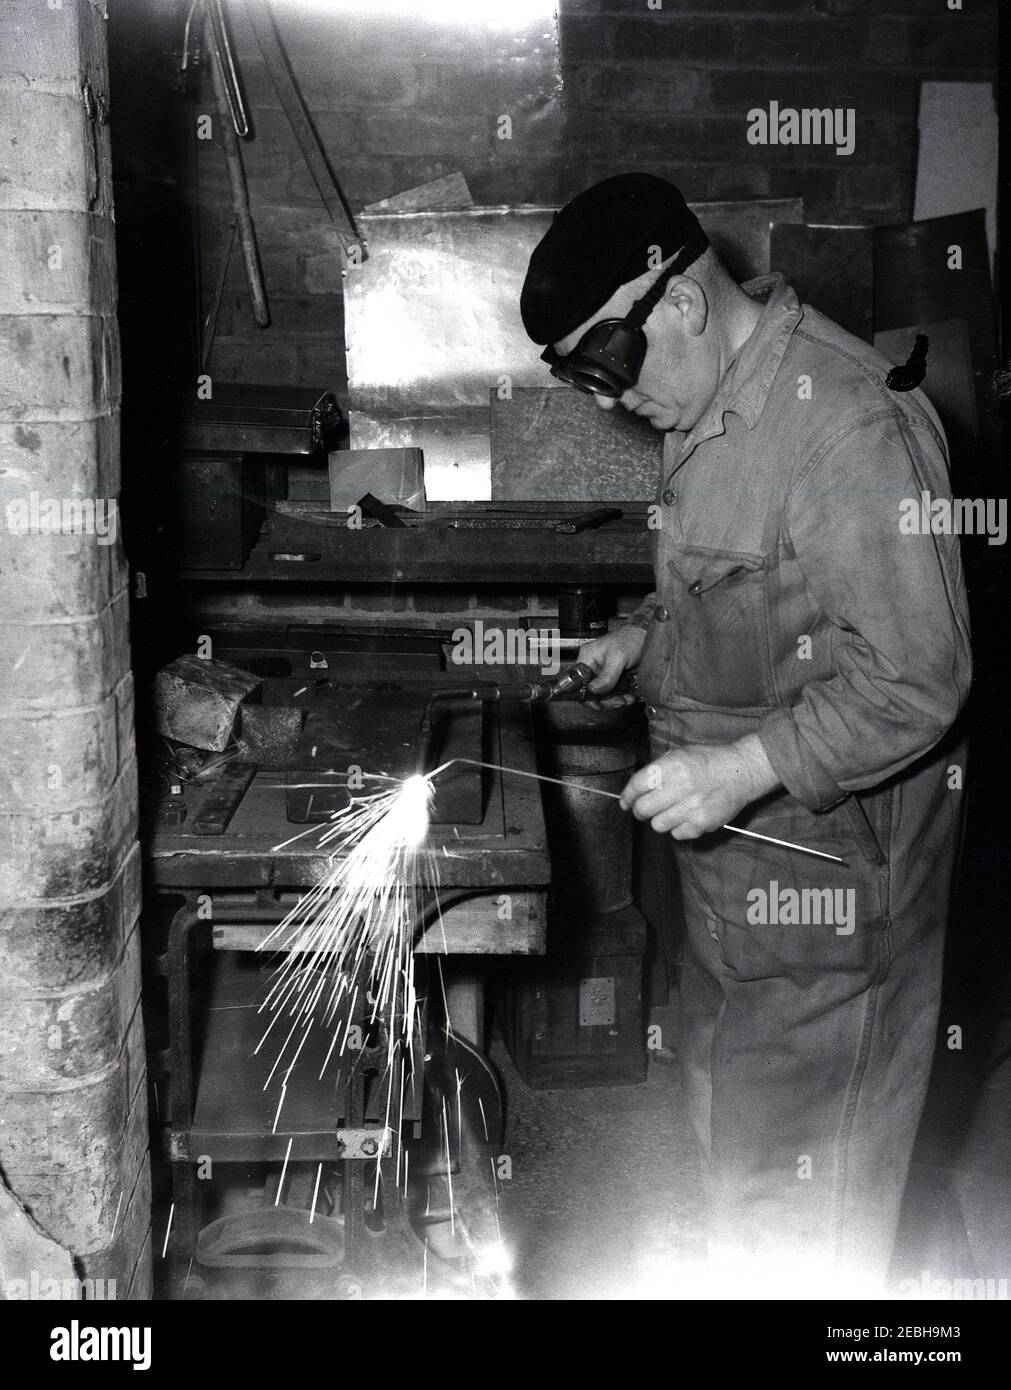 1950s, historical, an artisan workman in overalls and wearing goggles and a berry on his hat in a small workshop doing metalwork or welding. Welding is the process of joining metals together. Fusion is the generic sheet metal fabrication term for joining together metals of similar compositions and melting points. A pool of molten material called the weld pool is formed due to the high melting points of the workpieces. Stock Photo